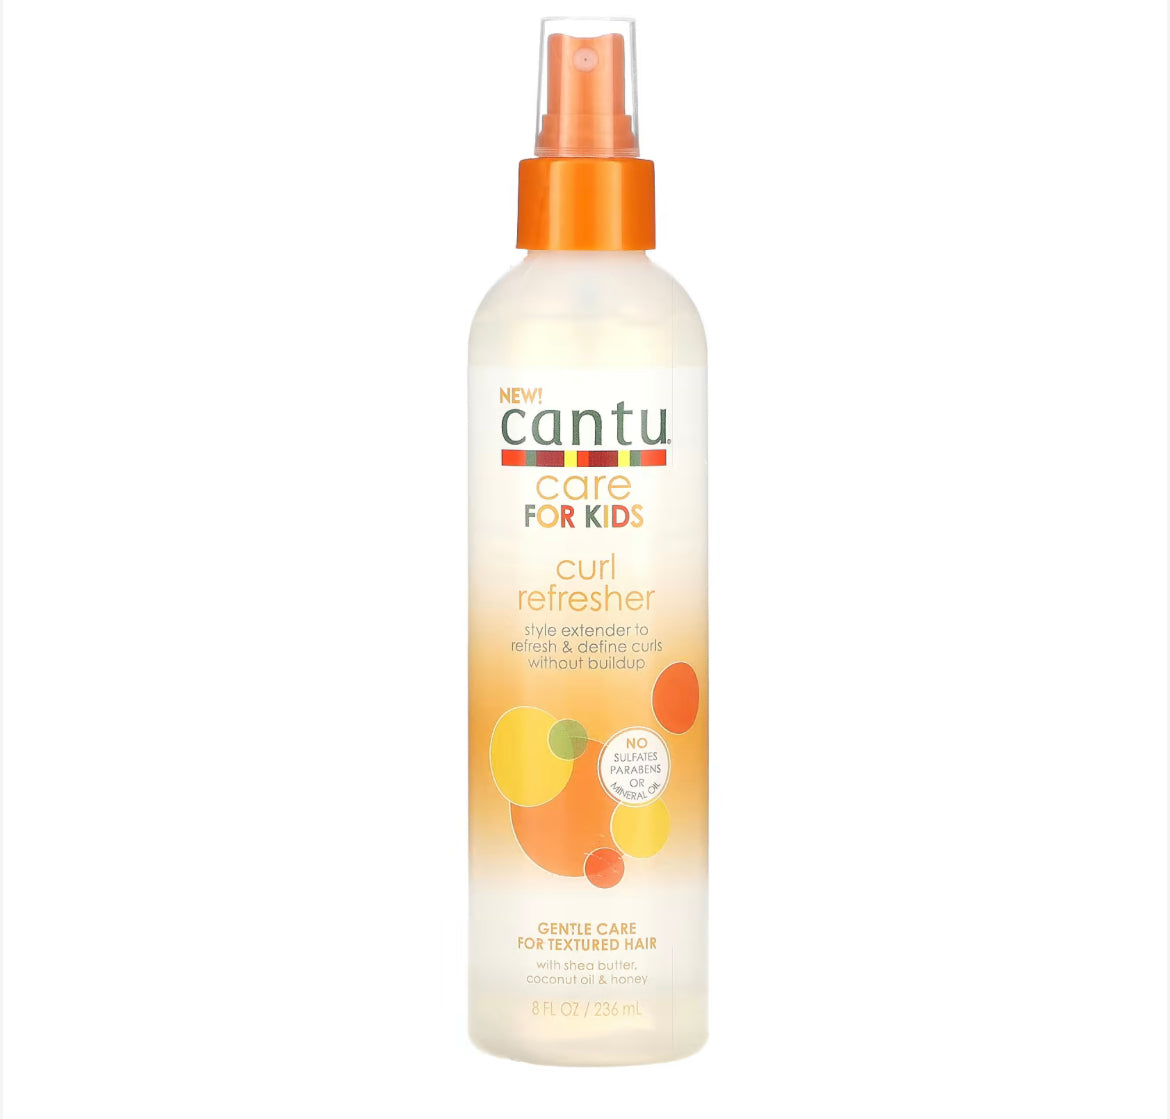 CANTU FOR KIDS: CURL REFRESHER